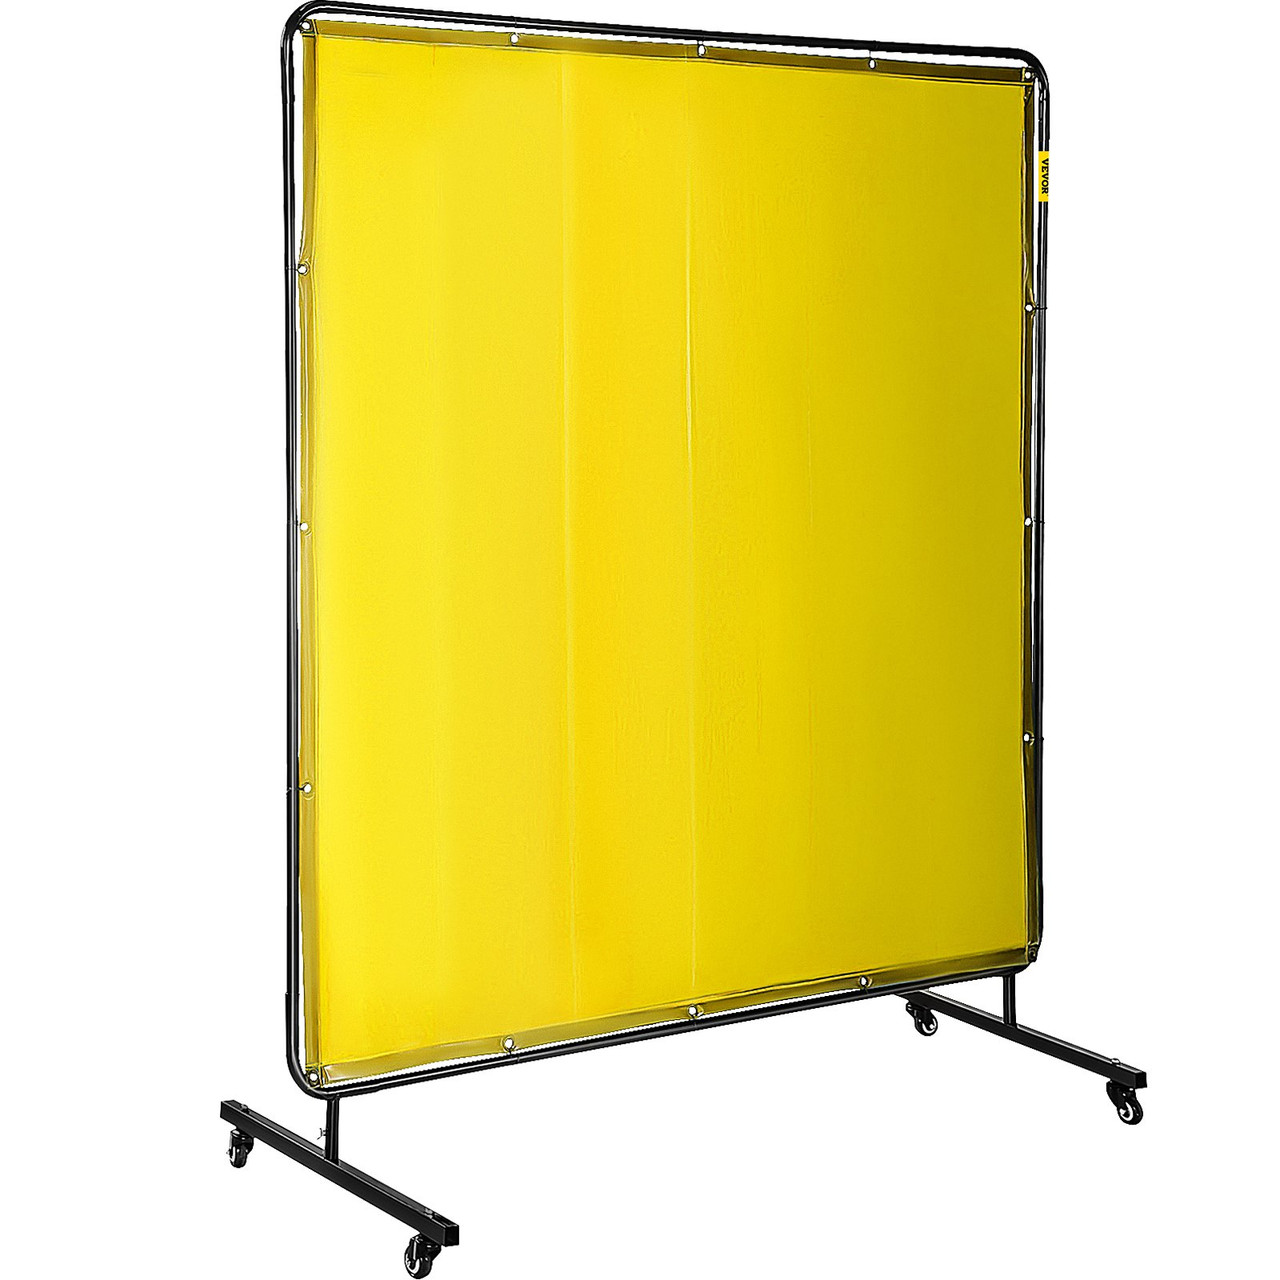 Welding Screen with Frame 6' x 6', Welding Curtain with 4 Wheels, Welding Protection Screen Yellow Flame-Resistant Vinyl, Portable Light-Proof